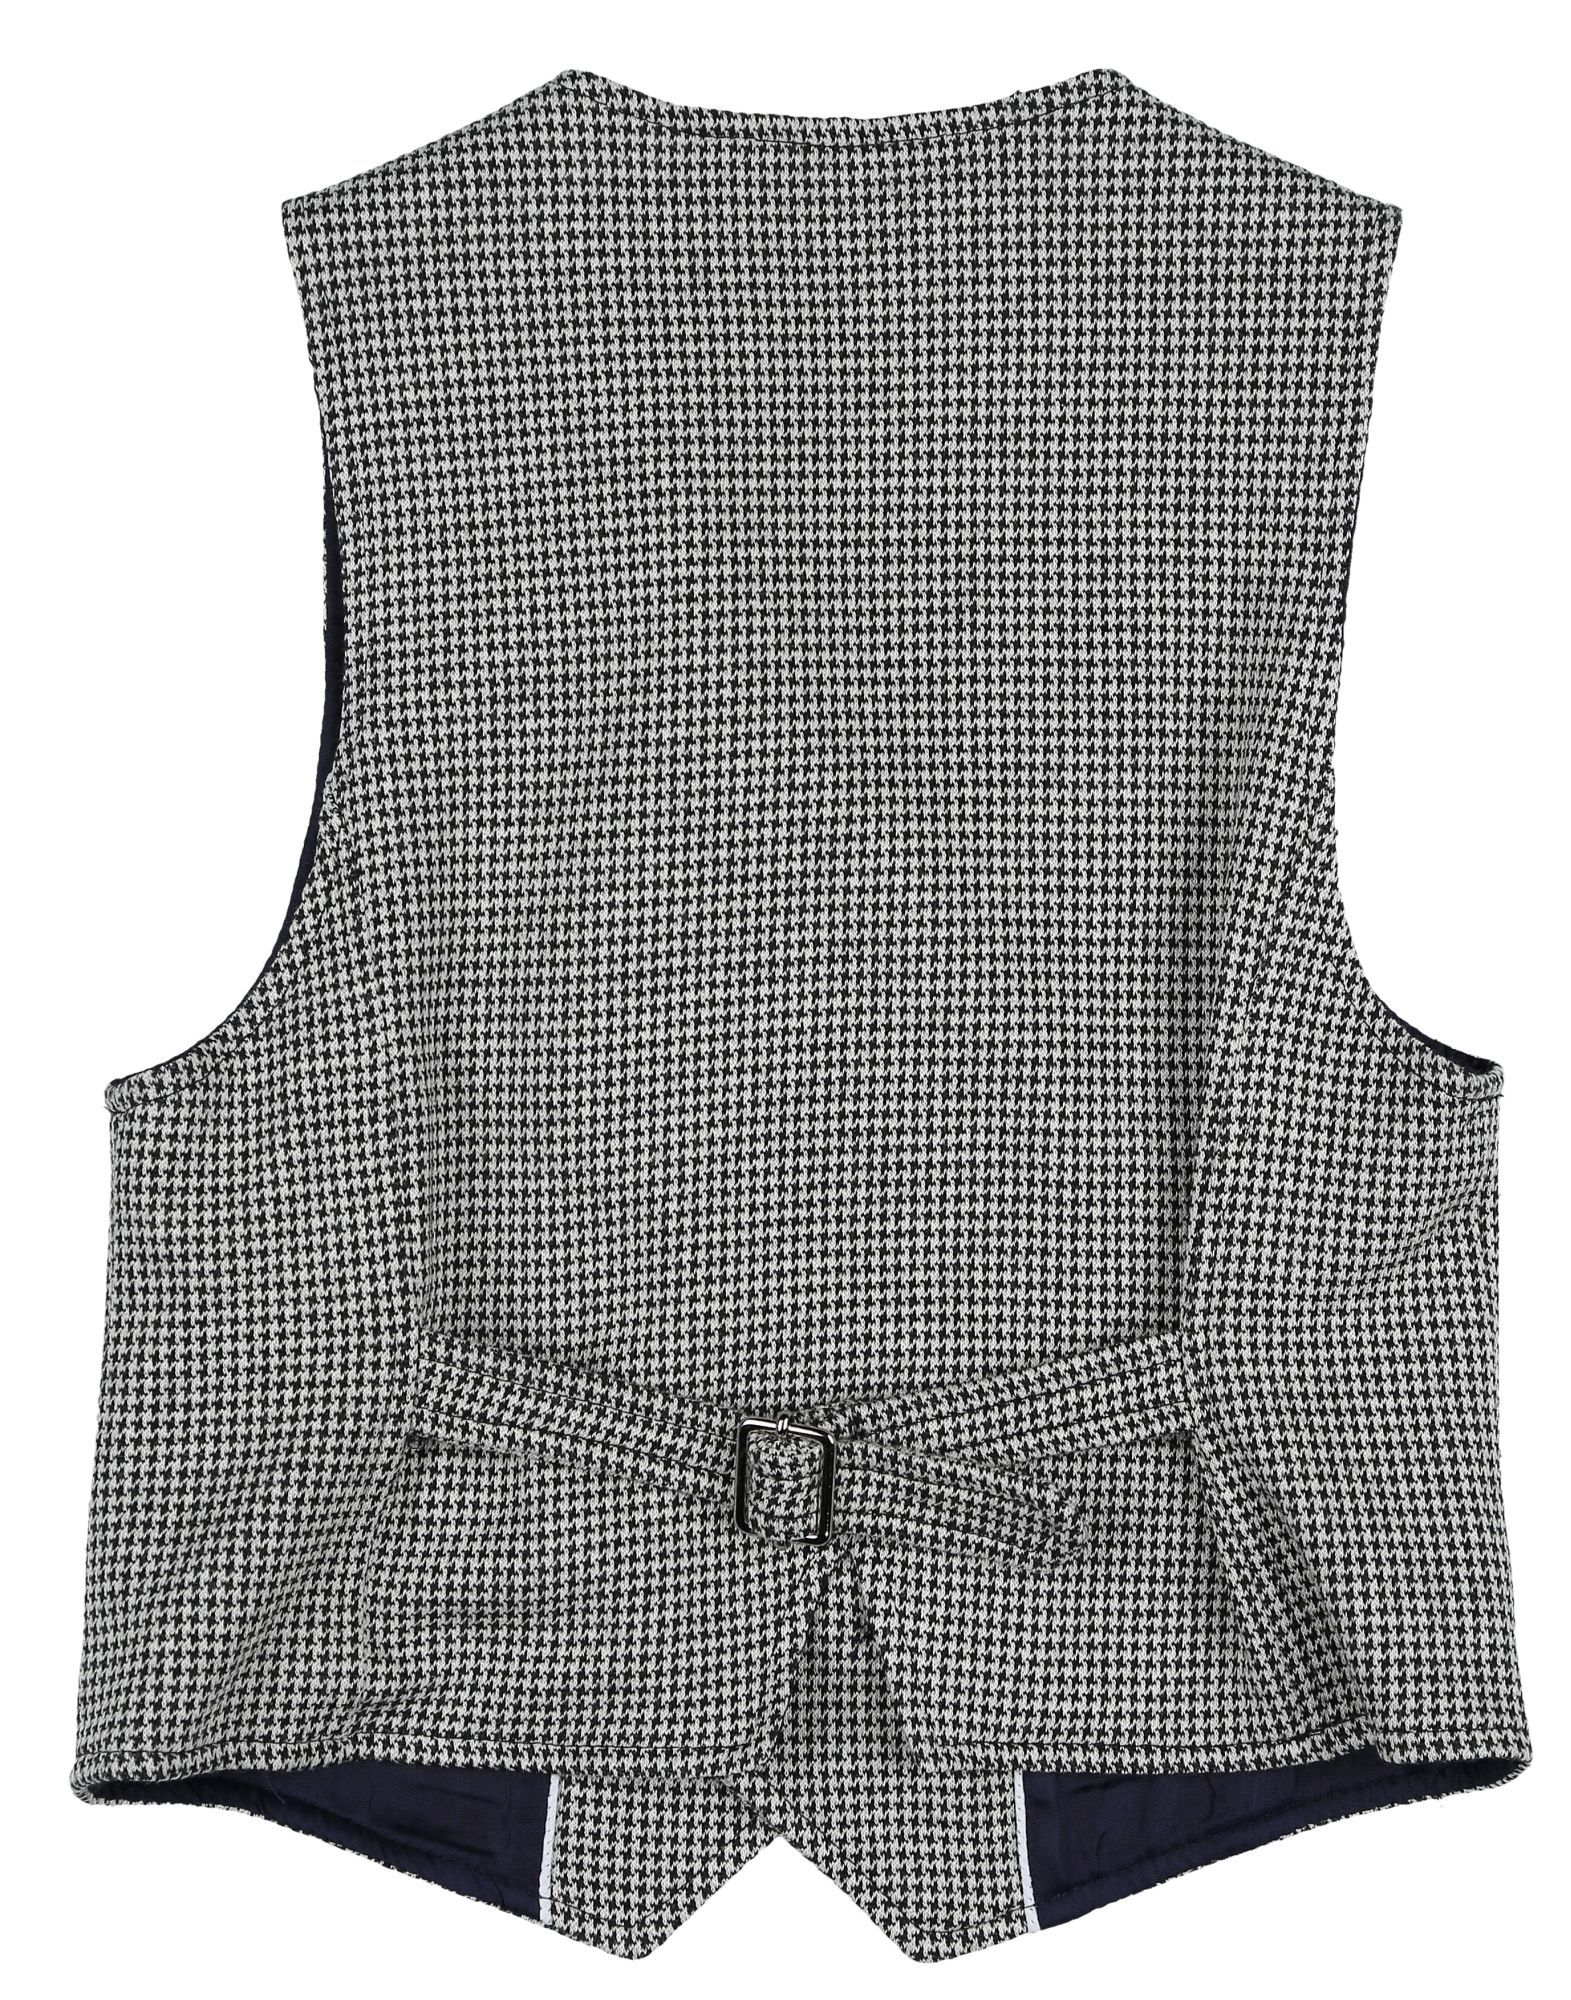 flannel, no appliqu�s, houndstooth, button closing, v-neckline, double-breasted, sleeveless, lined interior, stretch, do not wash, dry cleanable, iron at 110� c max, do not bleach, tumble dryable, button closing waistcoat with belt